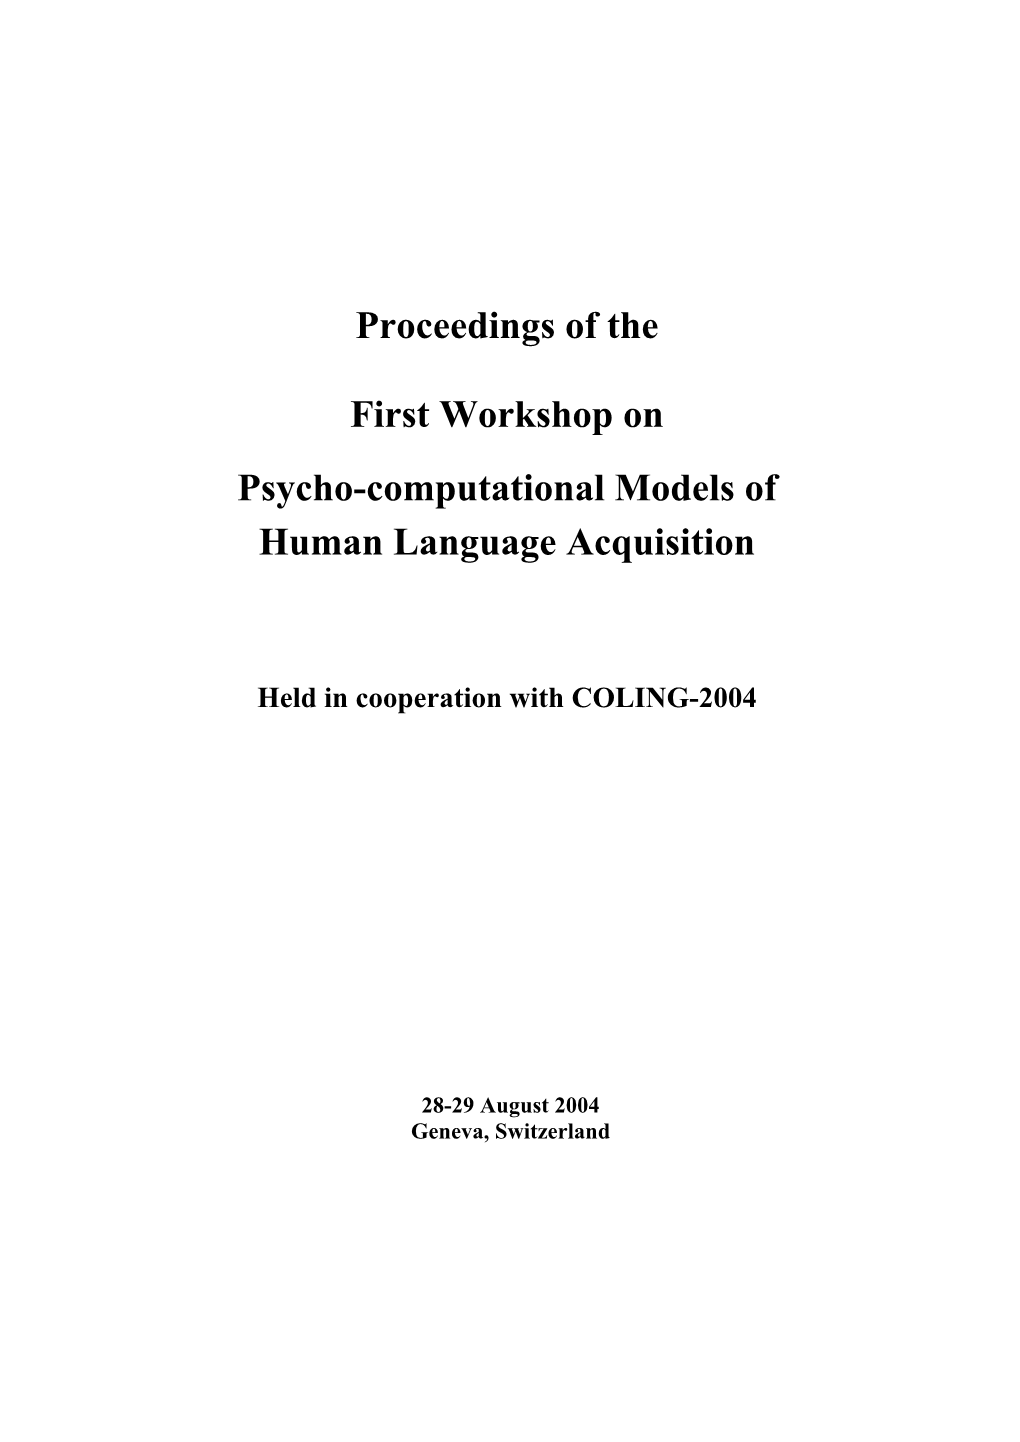 Proceedings of the First Workshop on Psycho-Computational Models Of